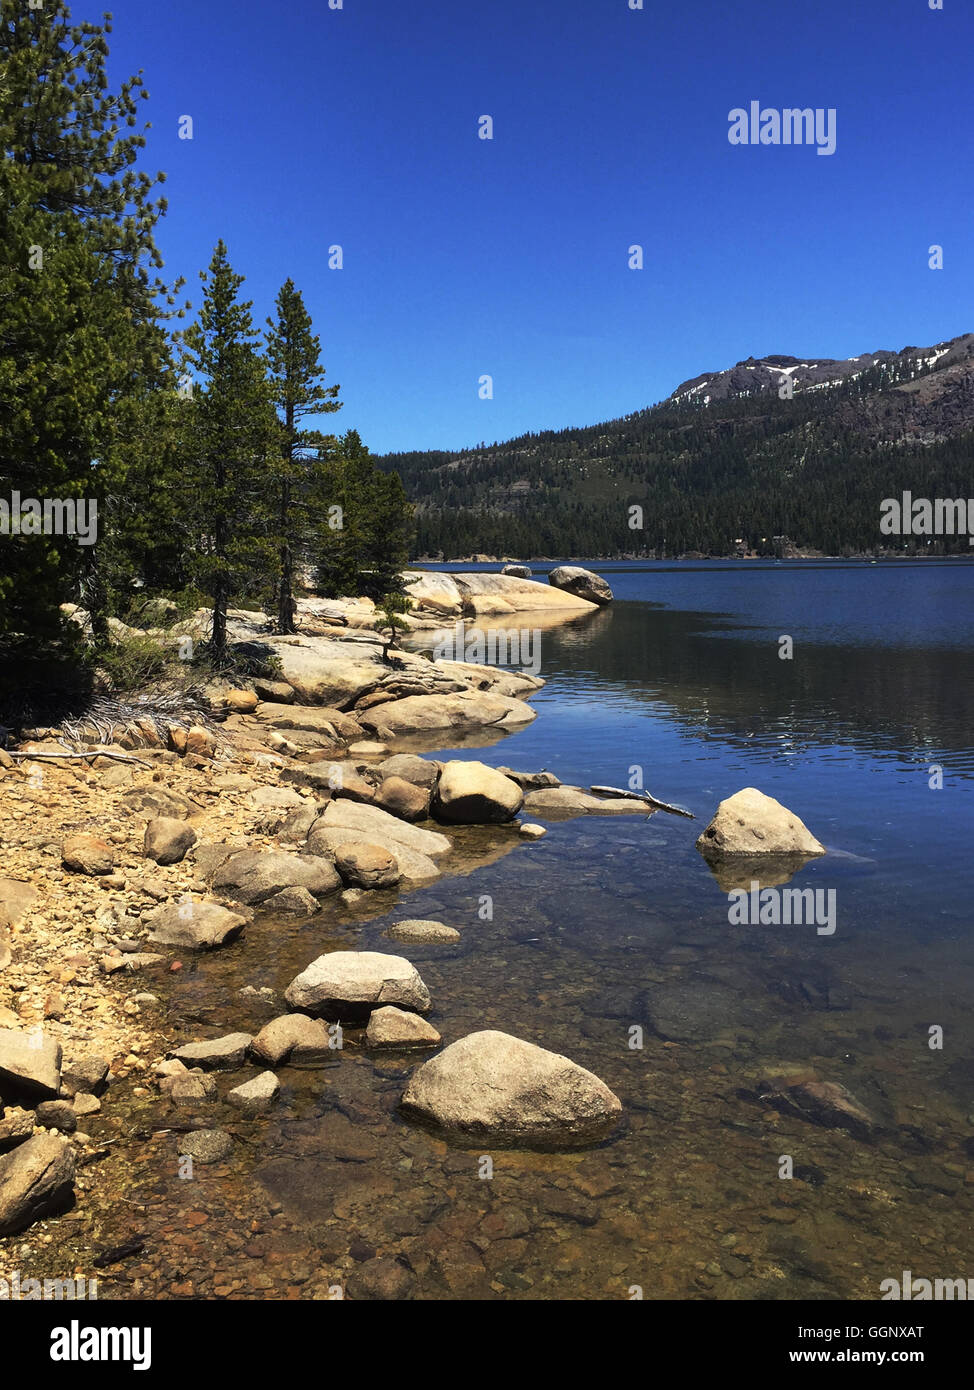 SILVER LAKE in the high Sierra along Highway 88 - CALIFORNIA Stock Photo